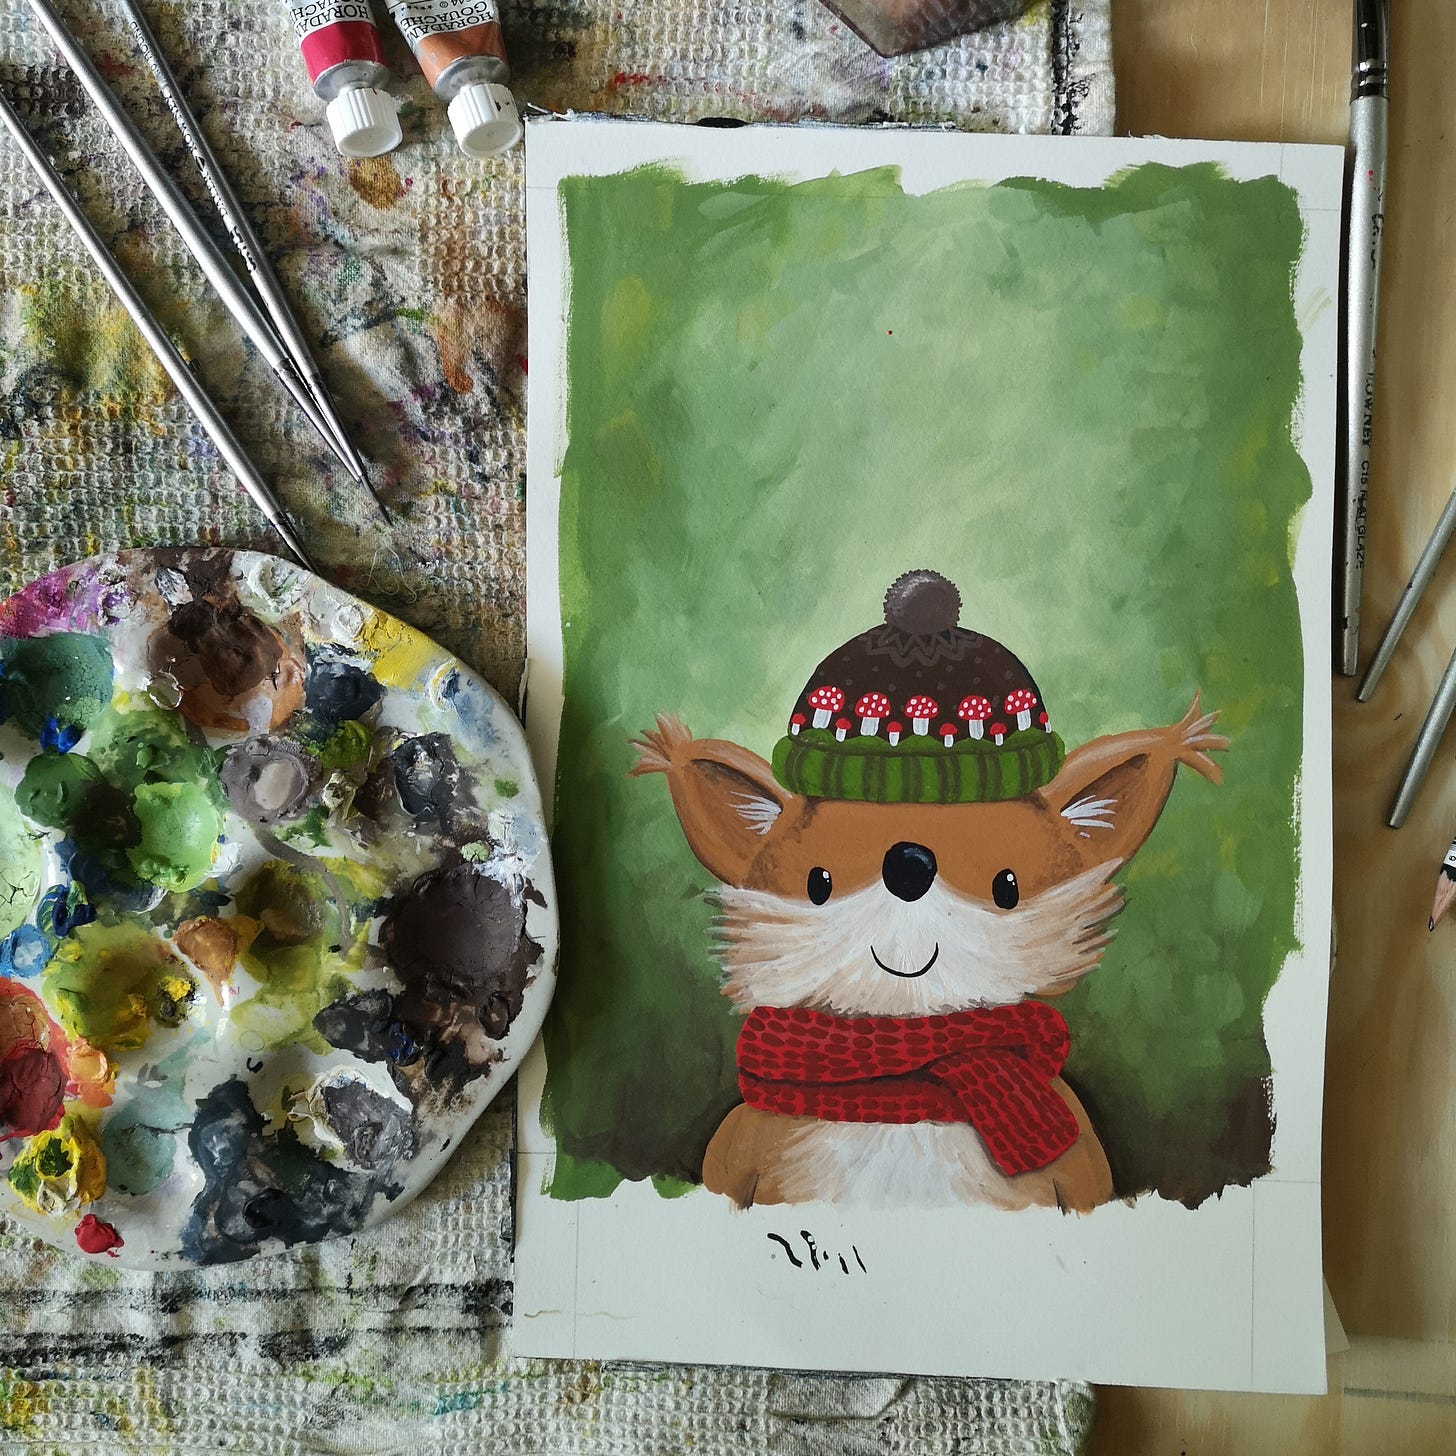 Image description: A photo from above of a painting table, covered with a paint splattered tea towel, tubes of gouache paint, some fine silver-handled brushes and a ceramic pallette clearly in heavy use. Beside these, a painting with a green background and the head and shoulders of a cute red squirrel with tufty ears. The squirrel wears a red scarf and a bobble hat with a green brim and brown background, red and white toadstools depicted all around.